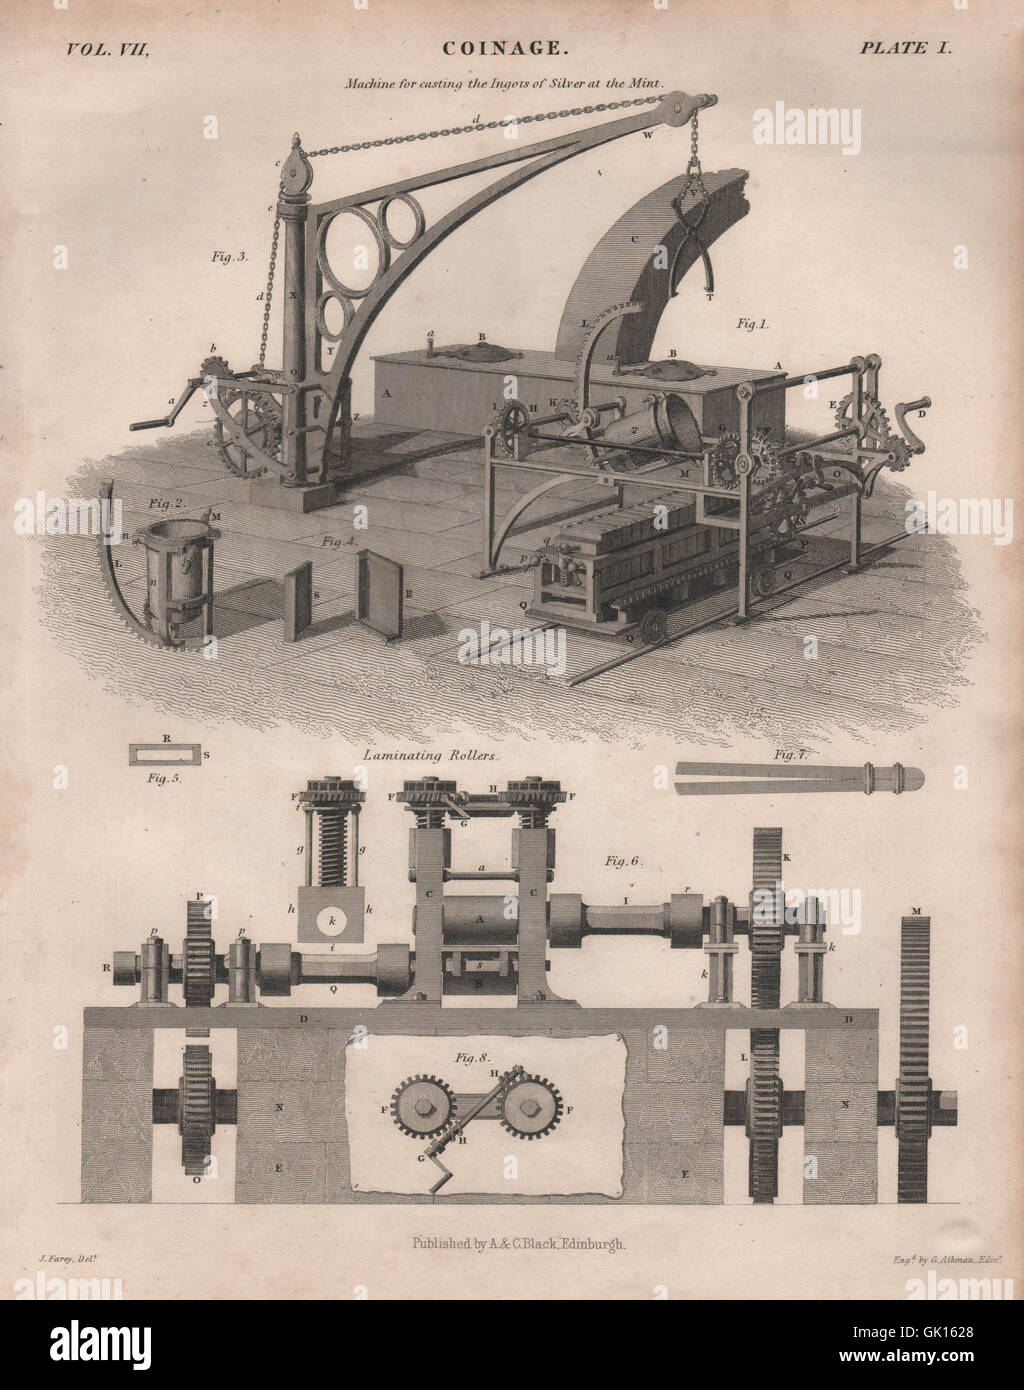 Coinage. Machine for casting silver ingots at the Mint; Laminating Rollers, 1860 Stock Photo